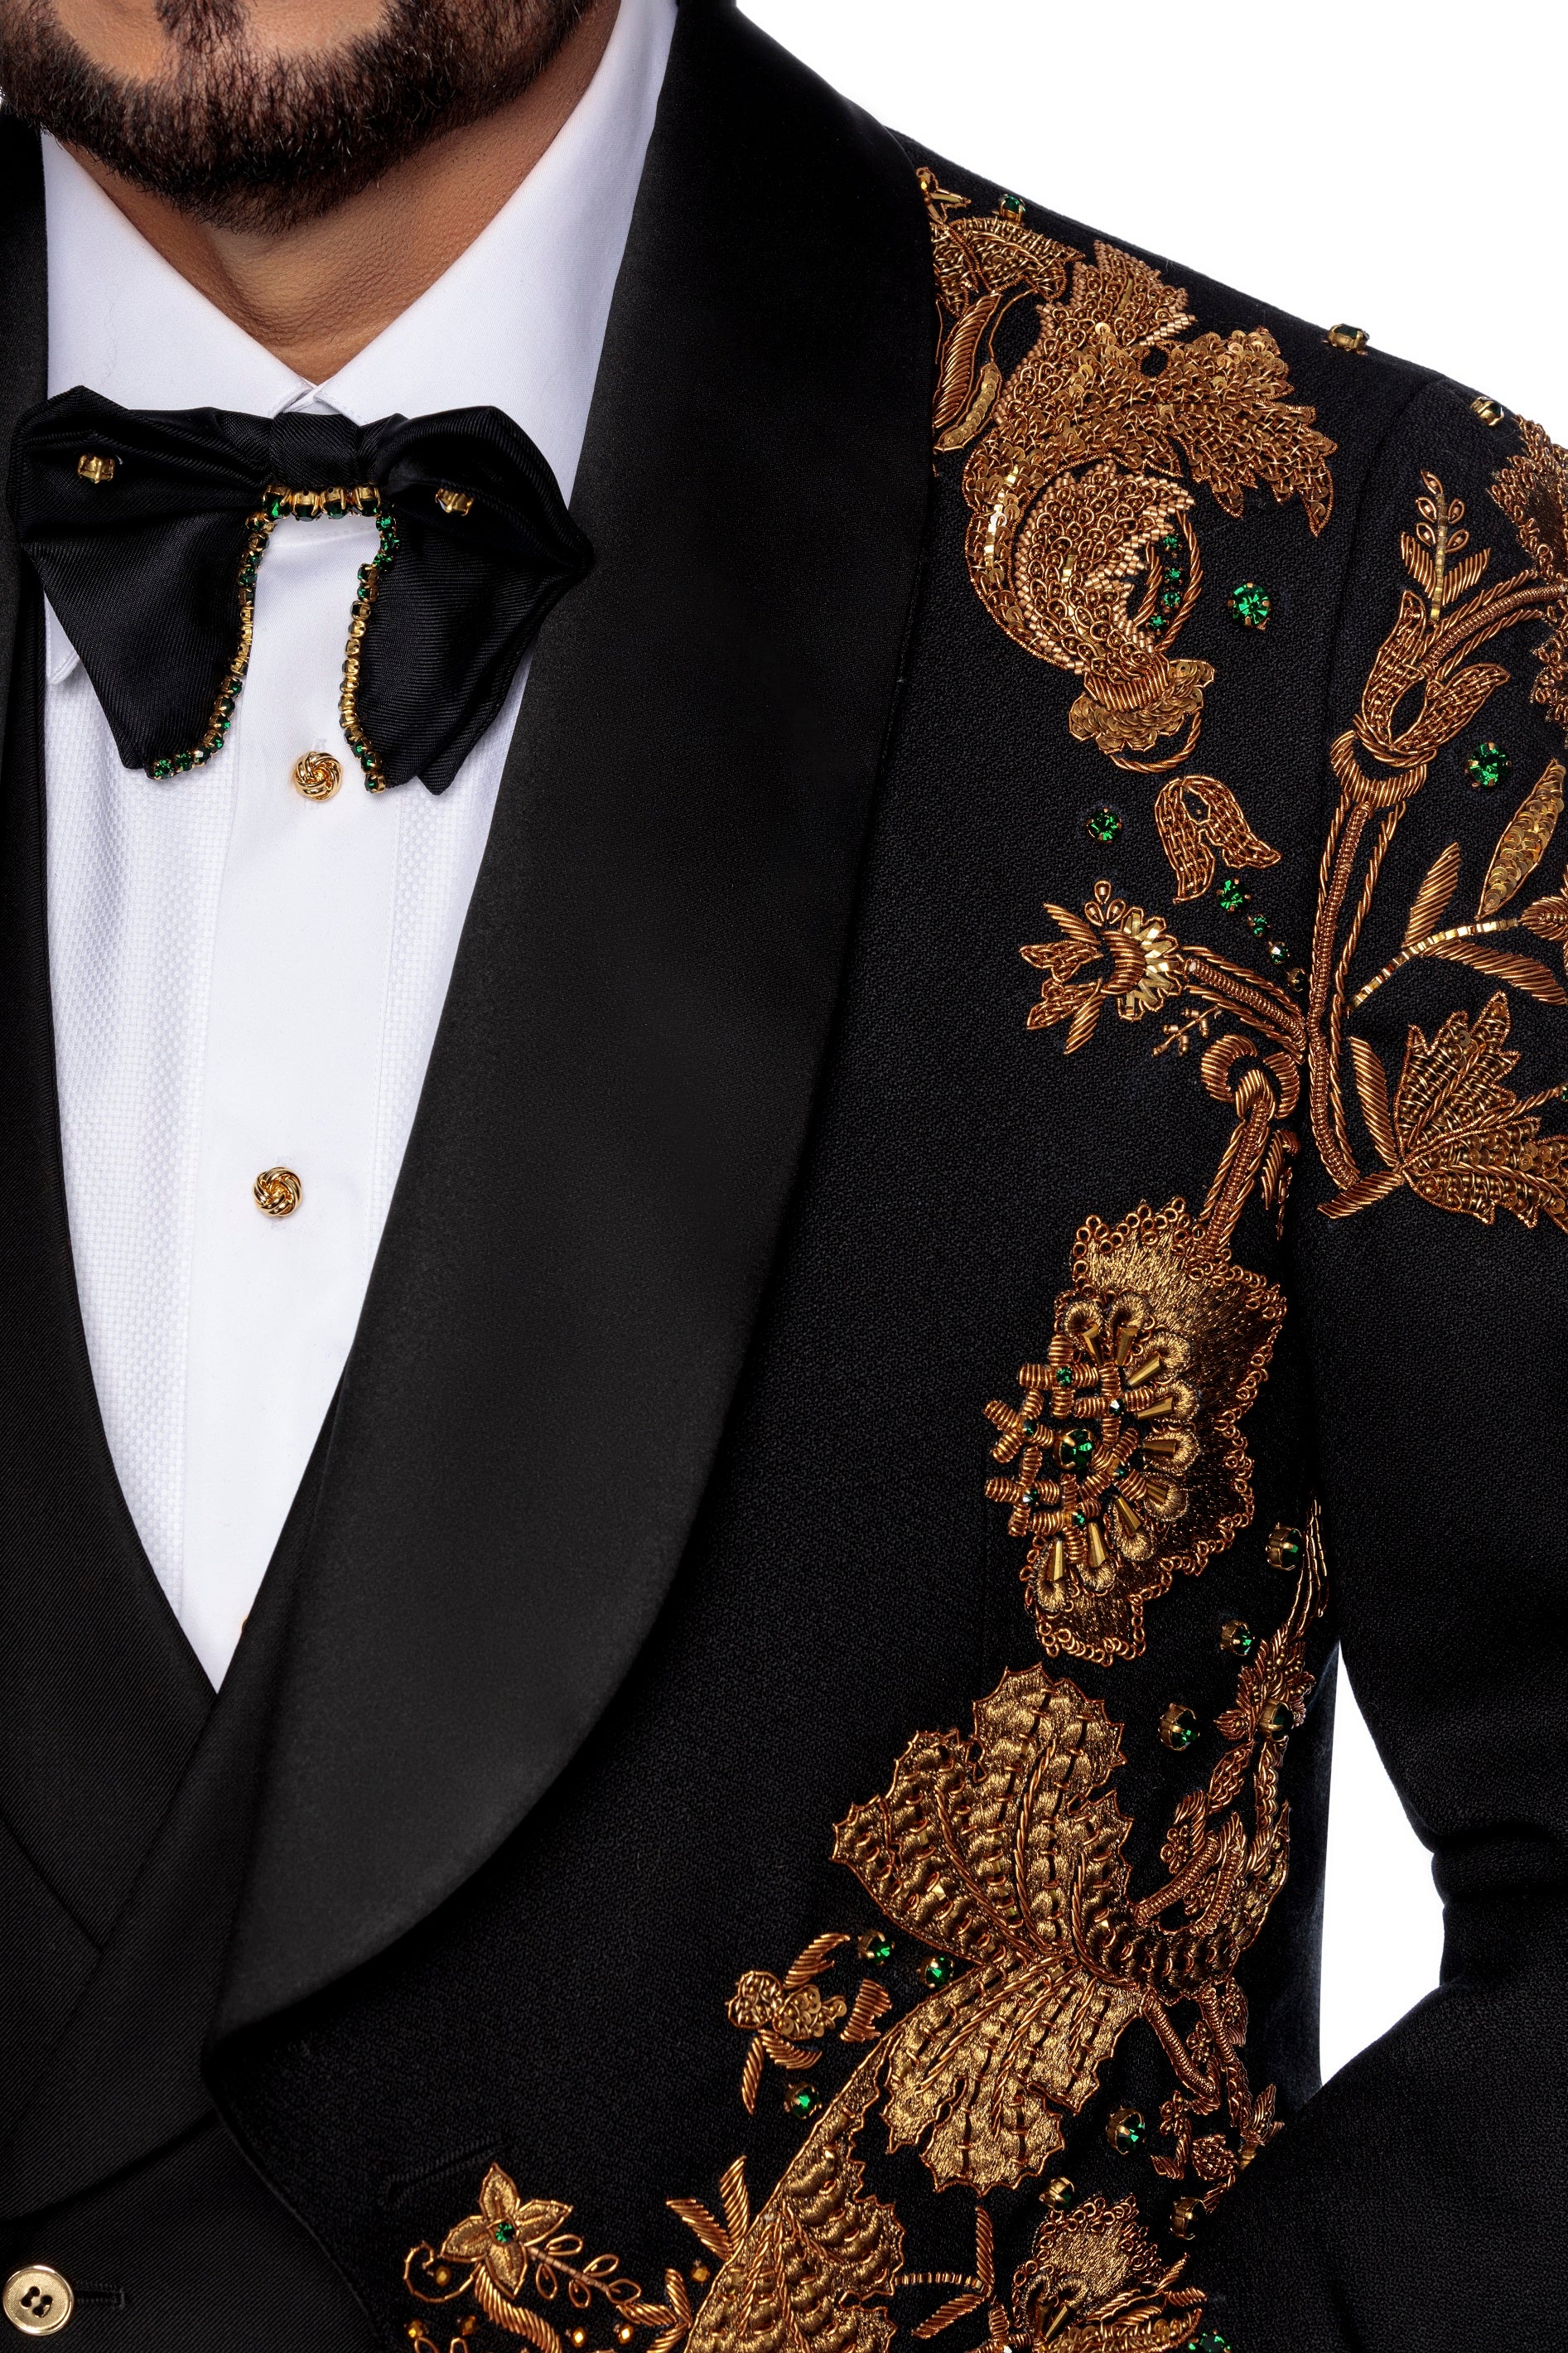 Wool tuxedo jacket with hand-embroidered bronze, sal lapel